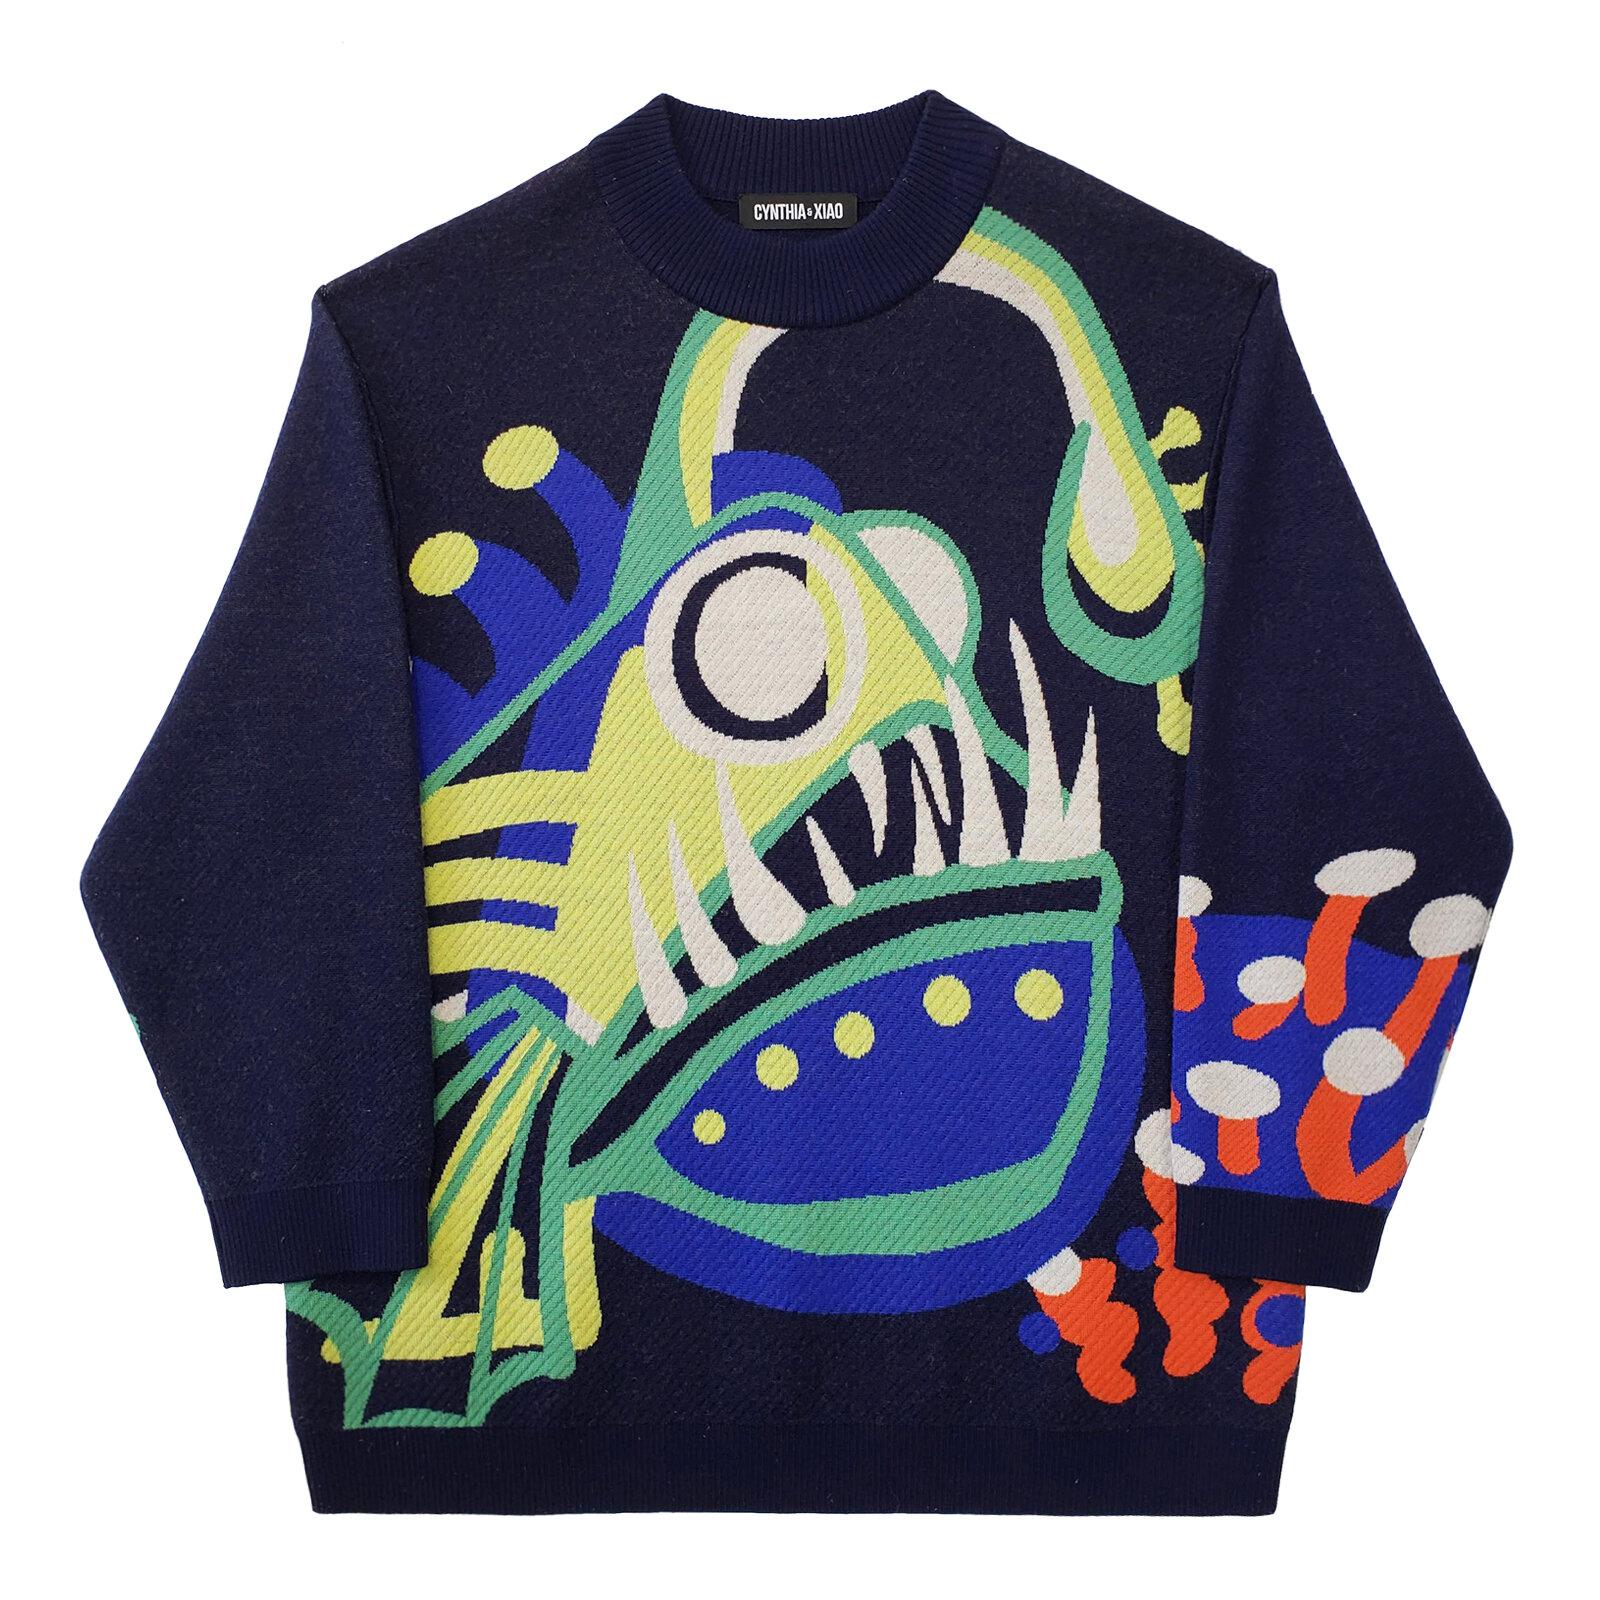 anglerfish oversize knit sweater by CYNTHIA AND XIAO